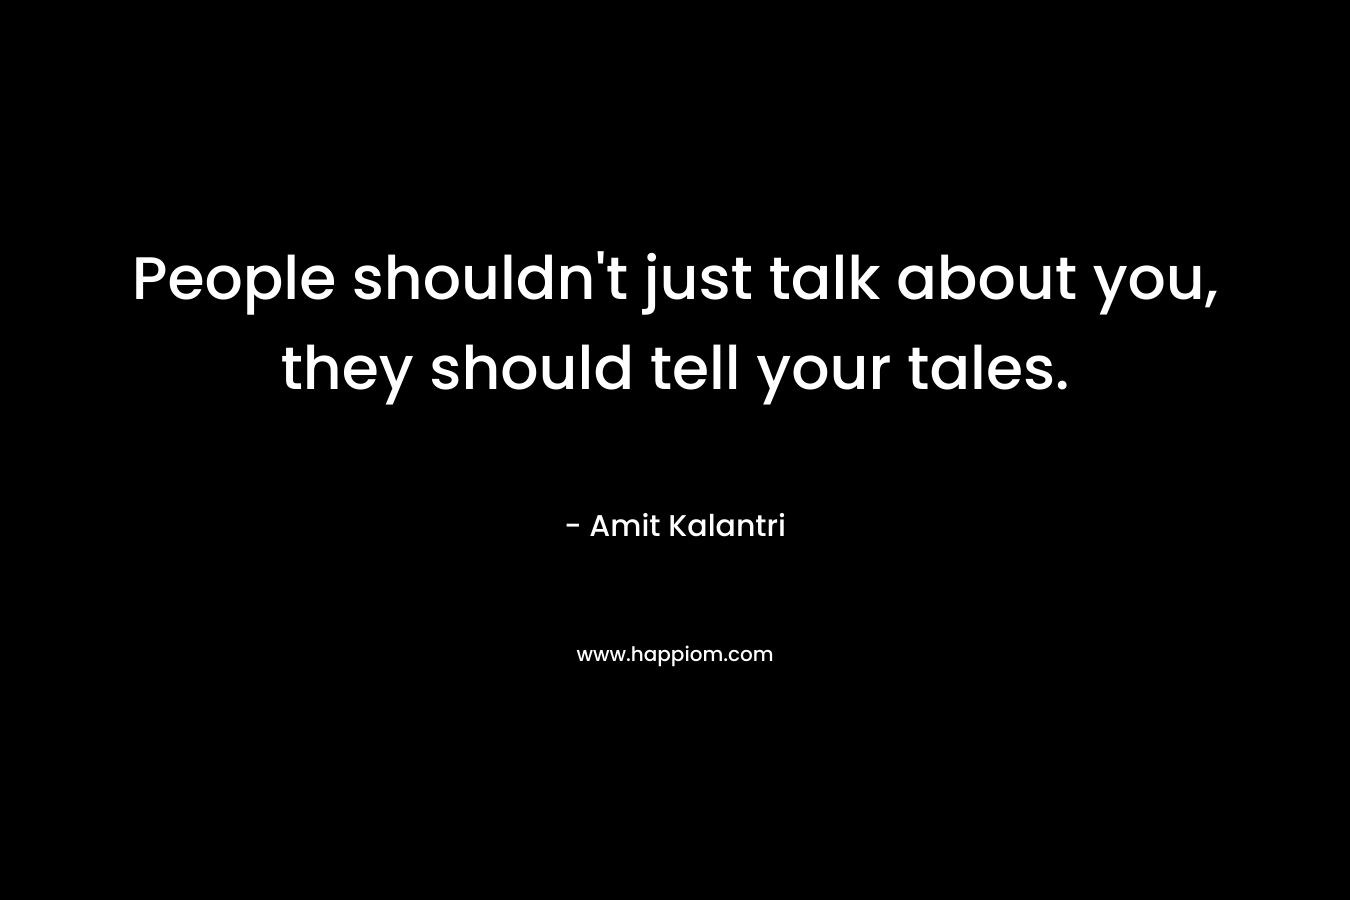 People shouldn't just talk about you, they should tell your tales.